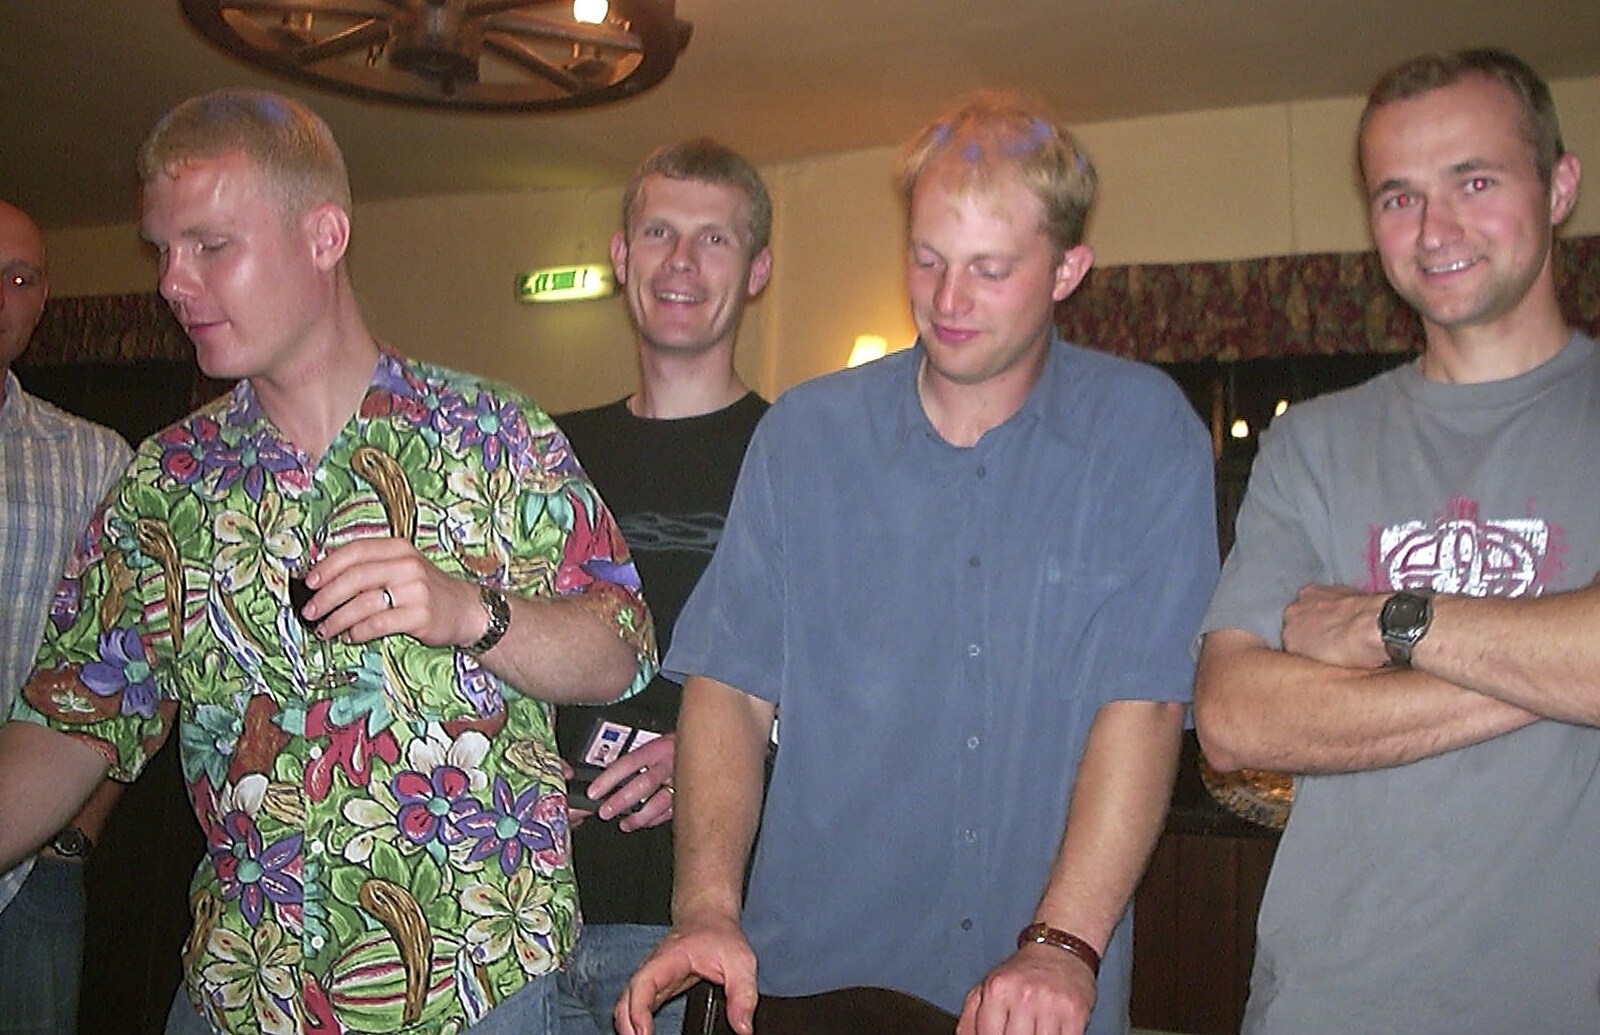 Paul's still got his purple spots from Paul's Stag Night, Brome, Scole and Bressingham - Friday 20th August 2004